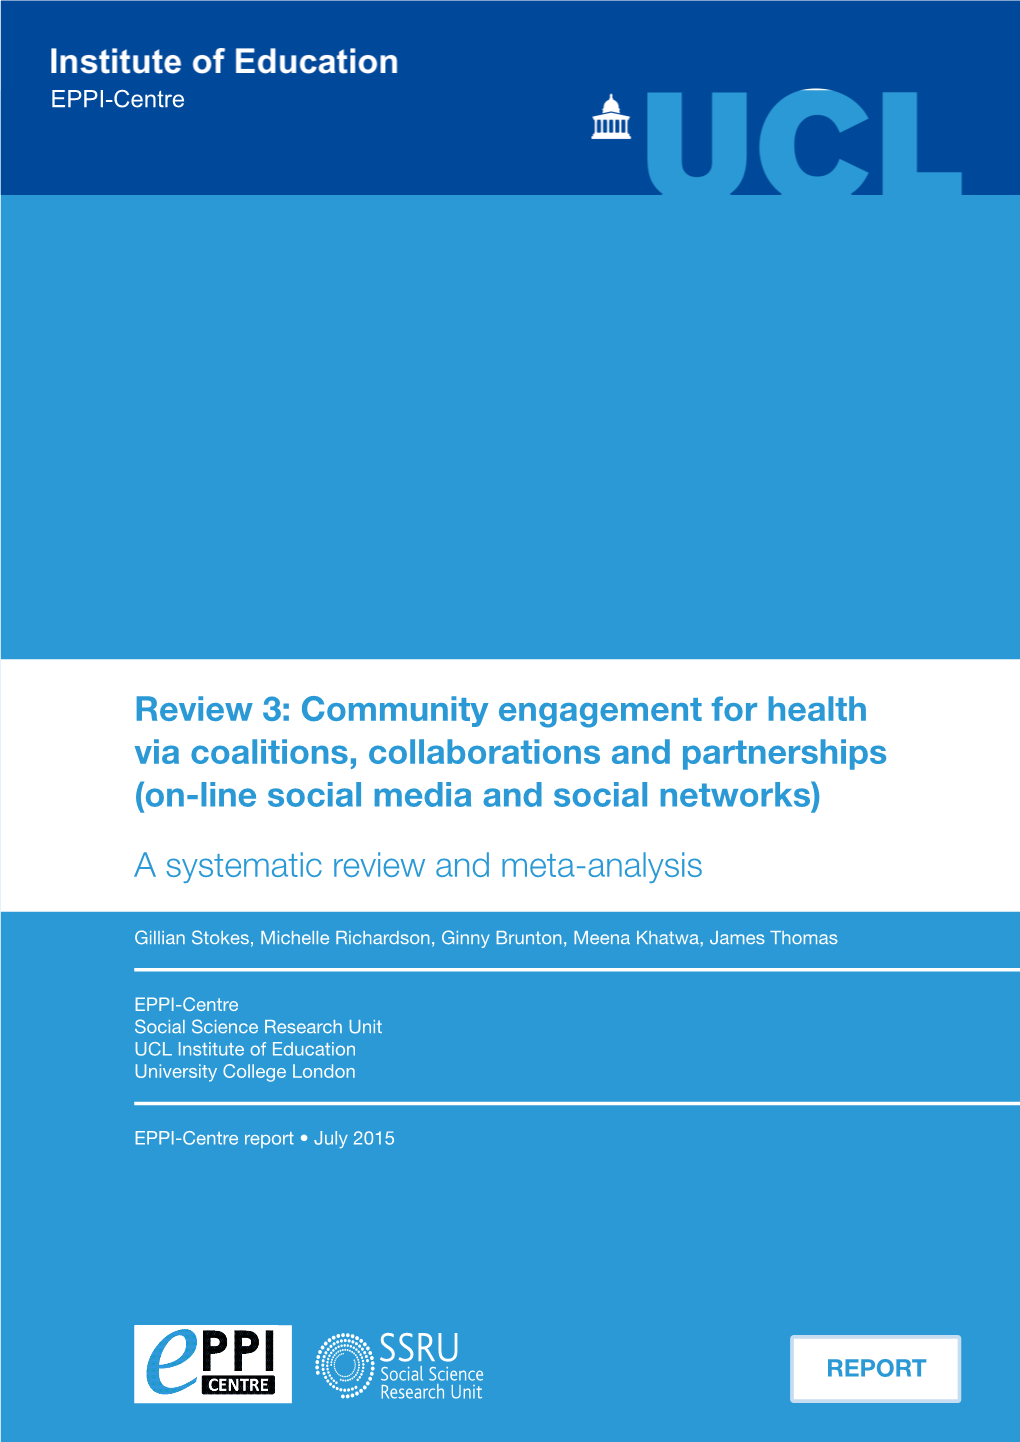 Community Engagement for Health Via Coalitions, Collaborations and Partnerships (On-Line Social Media and Social Networks)